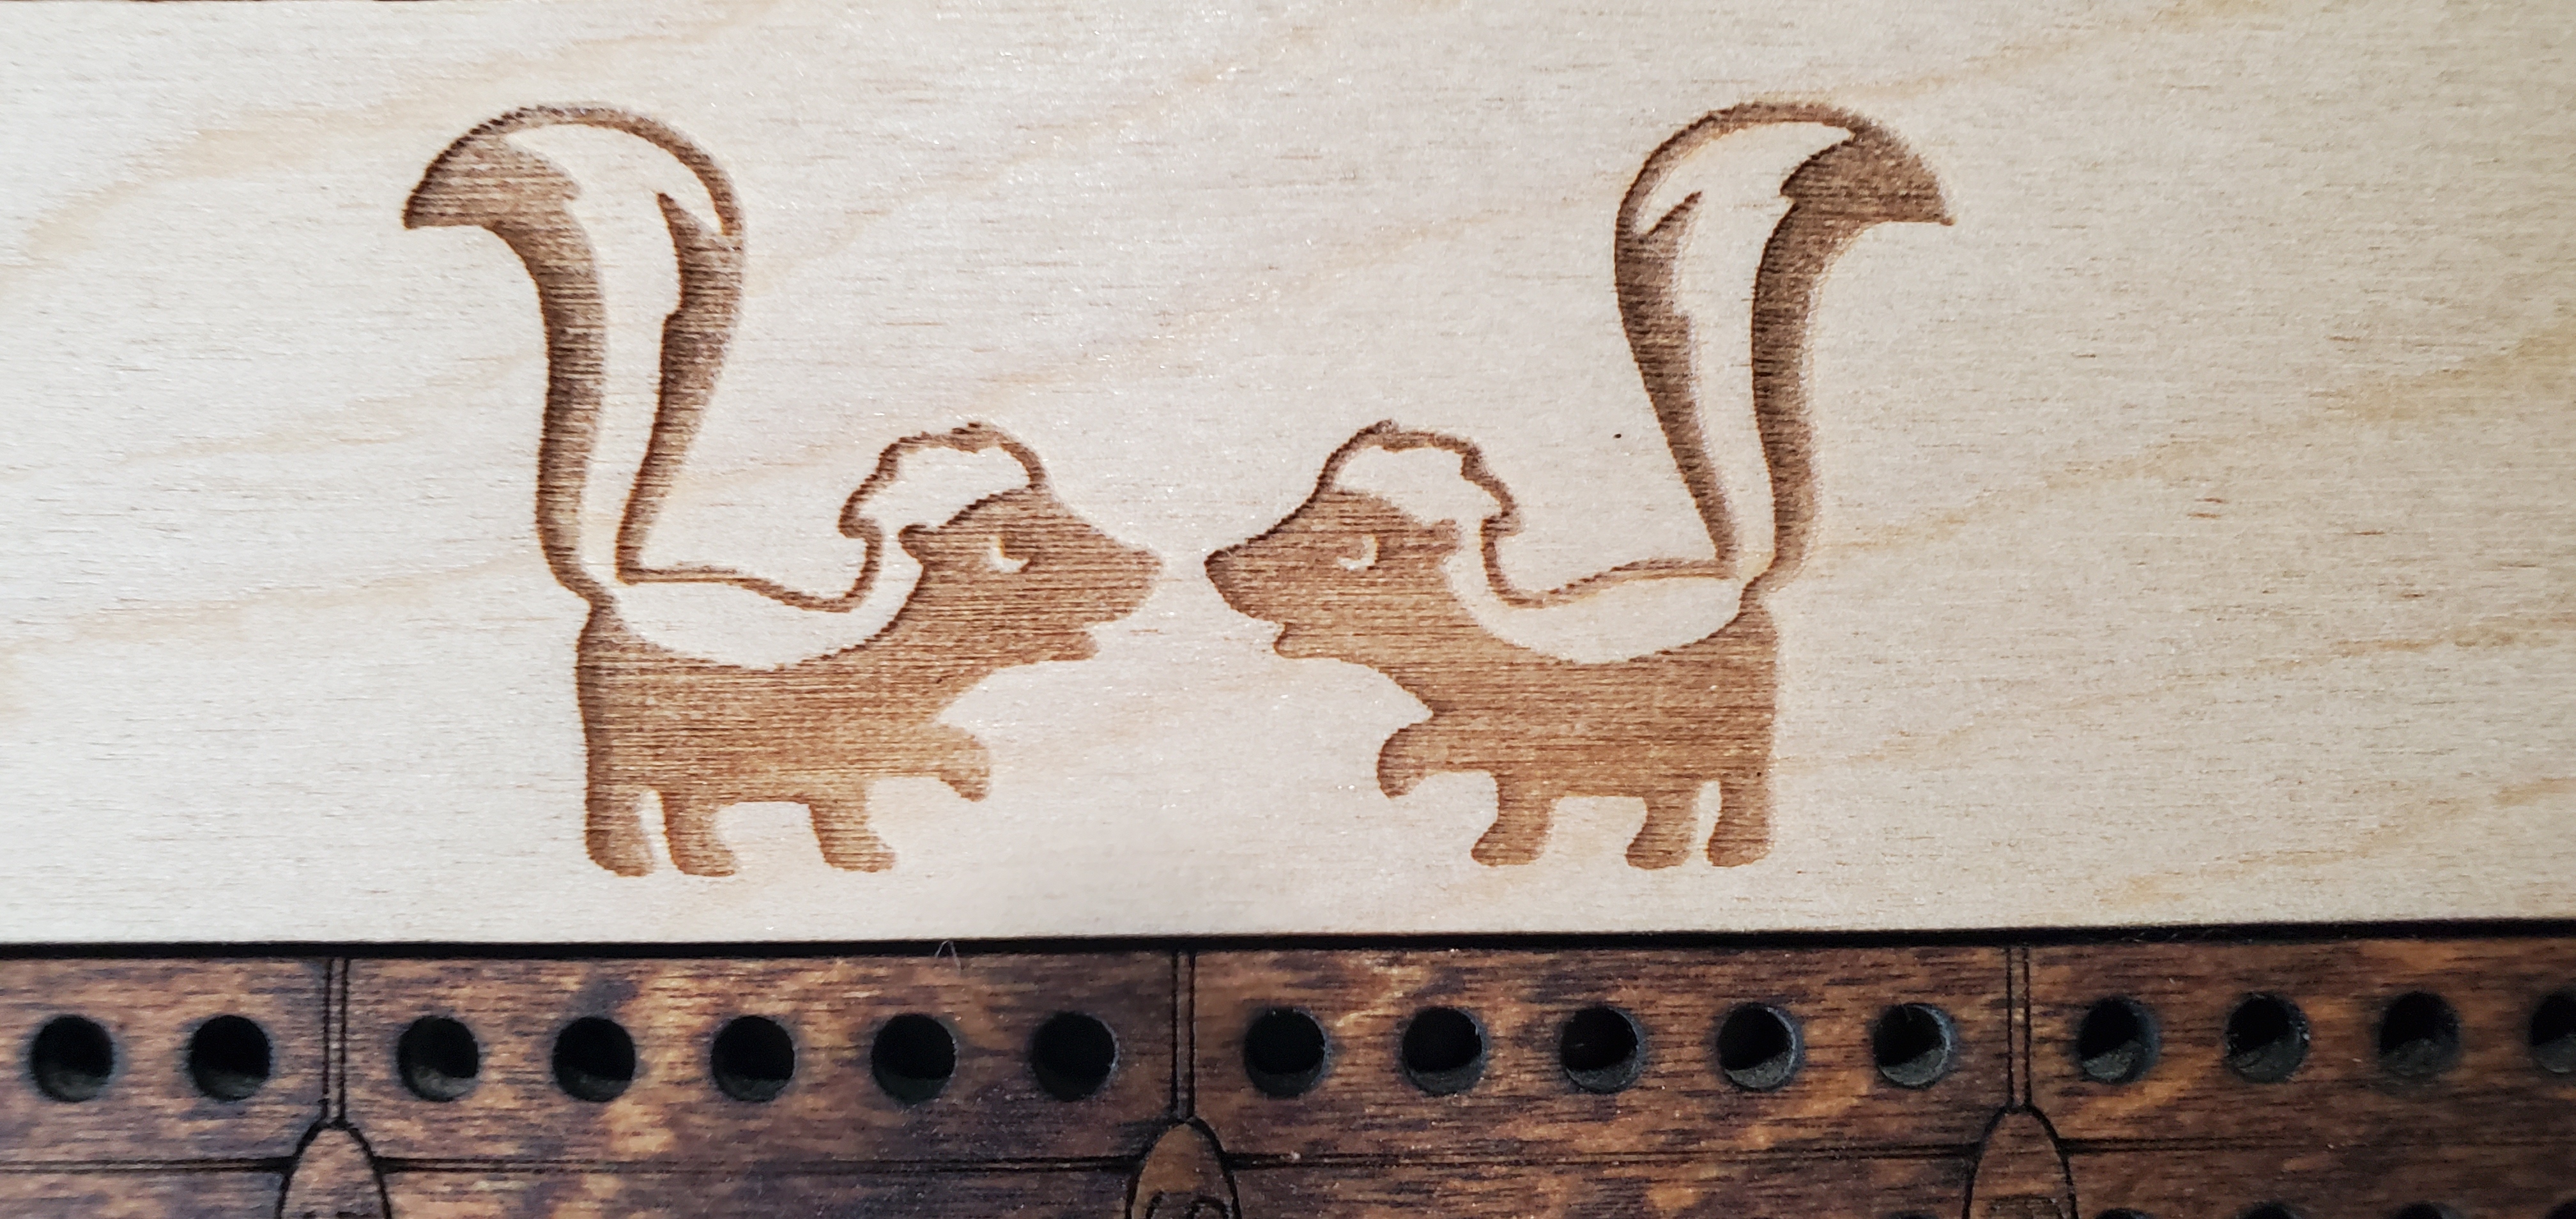 29 Hand Cribbage Board with Skunks